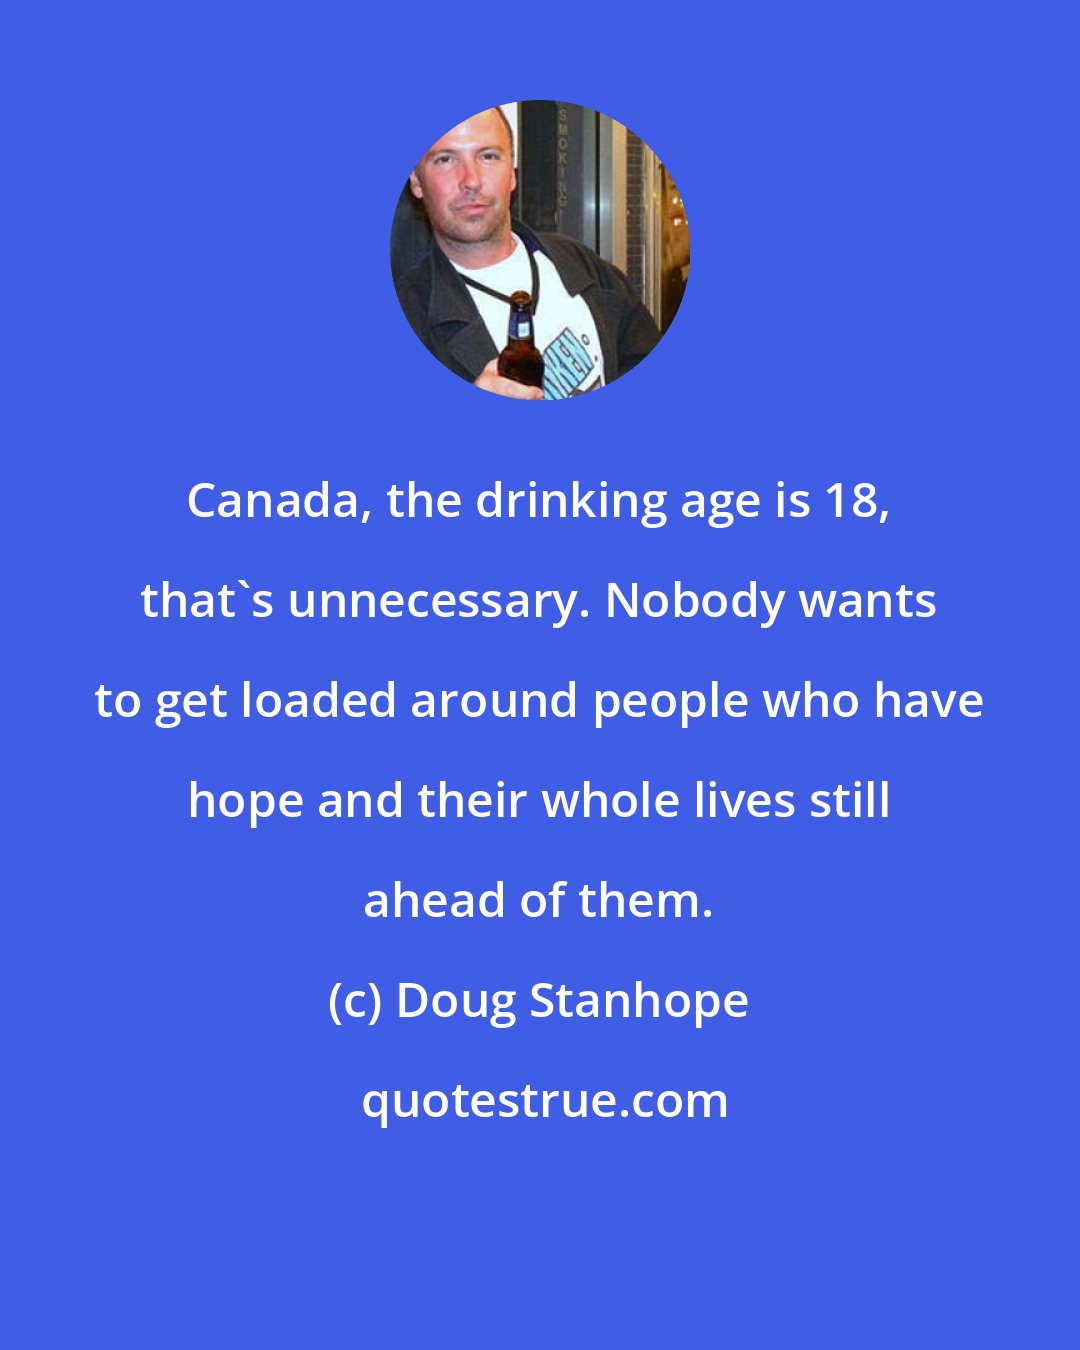 Doug Stanhope: Canada, the drinking age is 18, that's unnecessary. Nobody wants to get loaded around people who have hope and their whole lives still ahead of them.